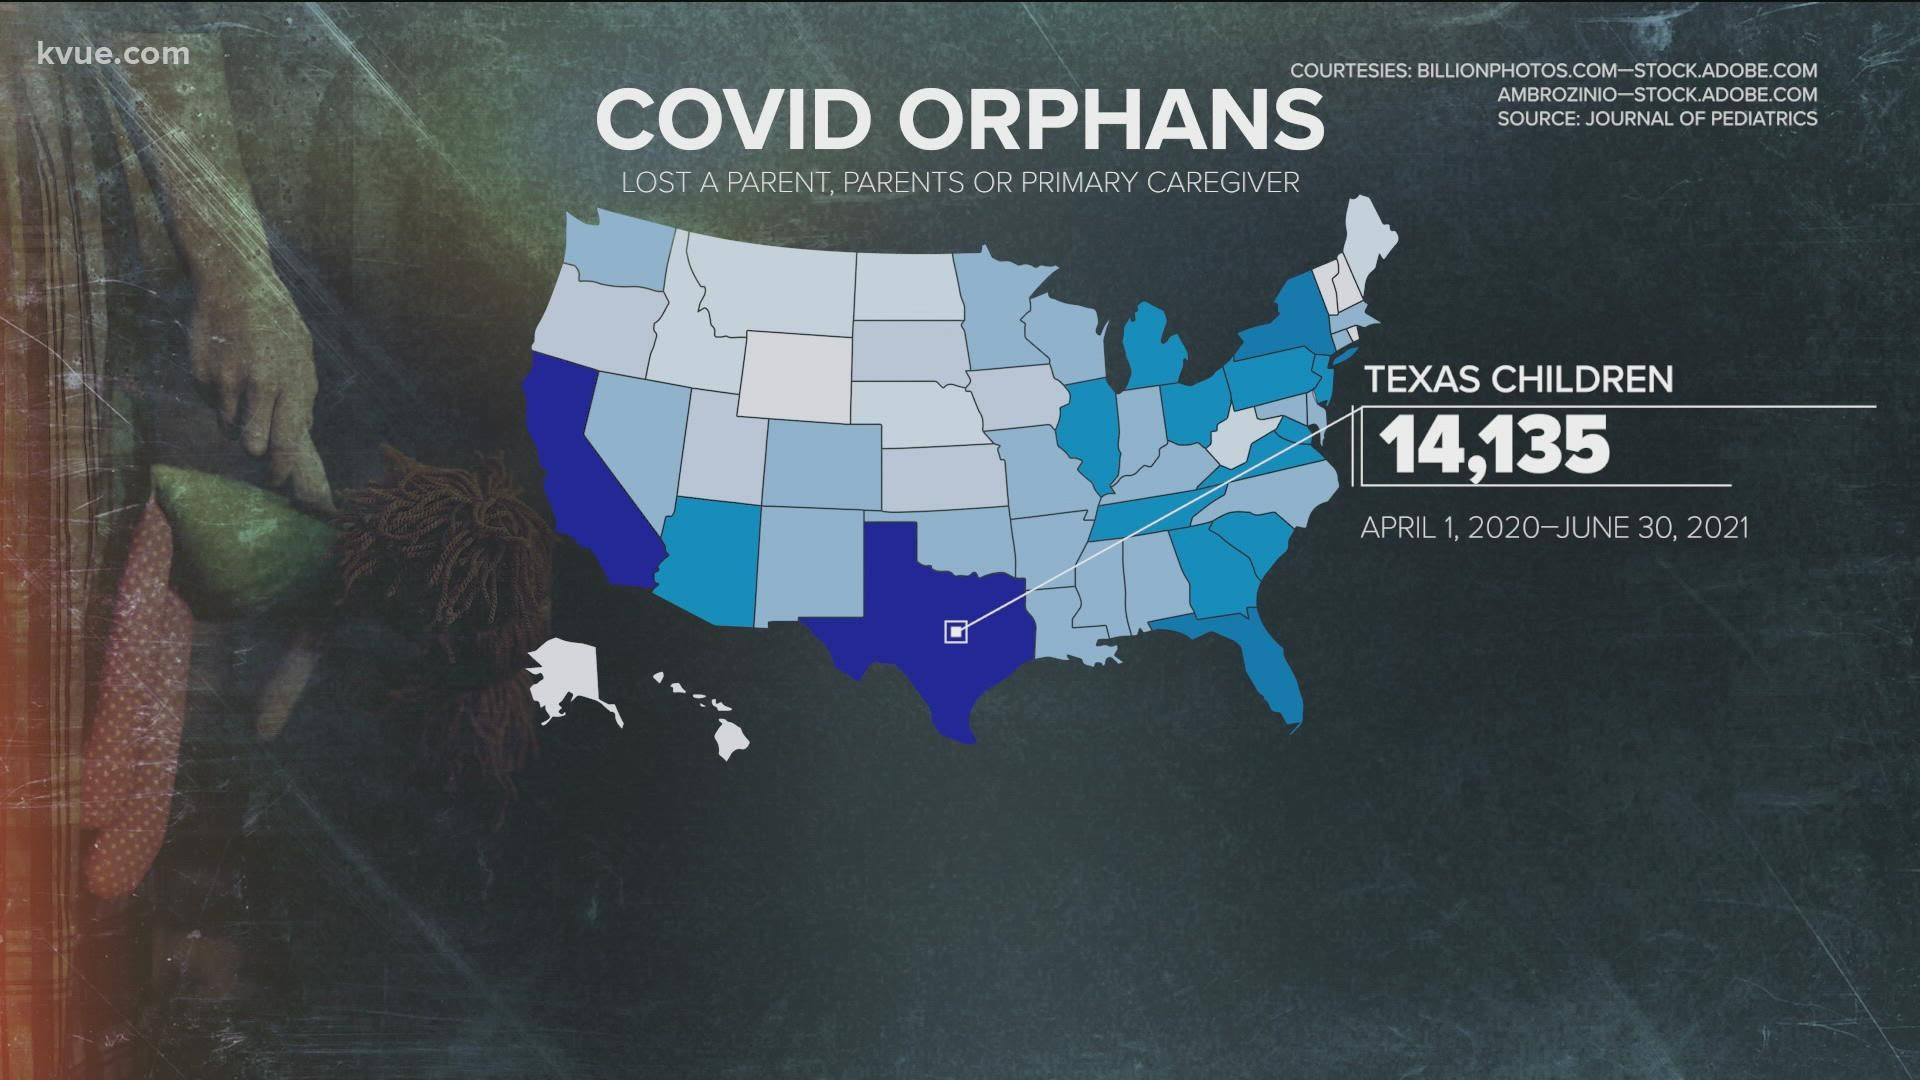 More than 14,000 Texas children lost a parent, parents or primary caregiver due to COVID-19. The KVUE Defenders are looking at the findings of a peer-reviewed study.